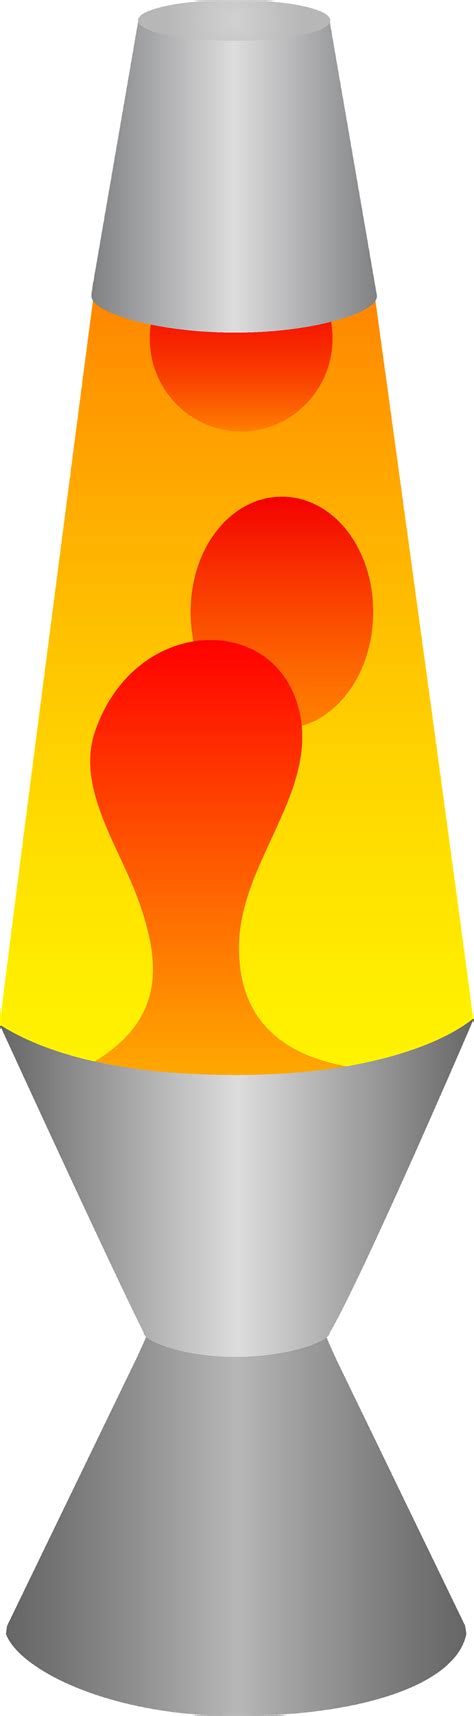 Lamp Clipart Lava Lamp Lamp Lava Lamp Transparent Free For Download On